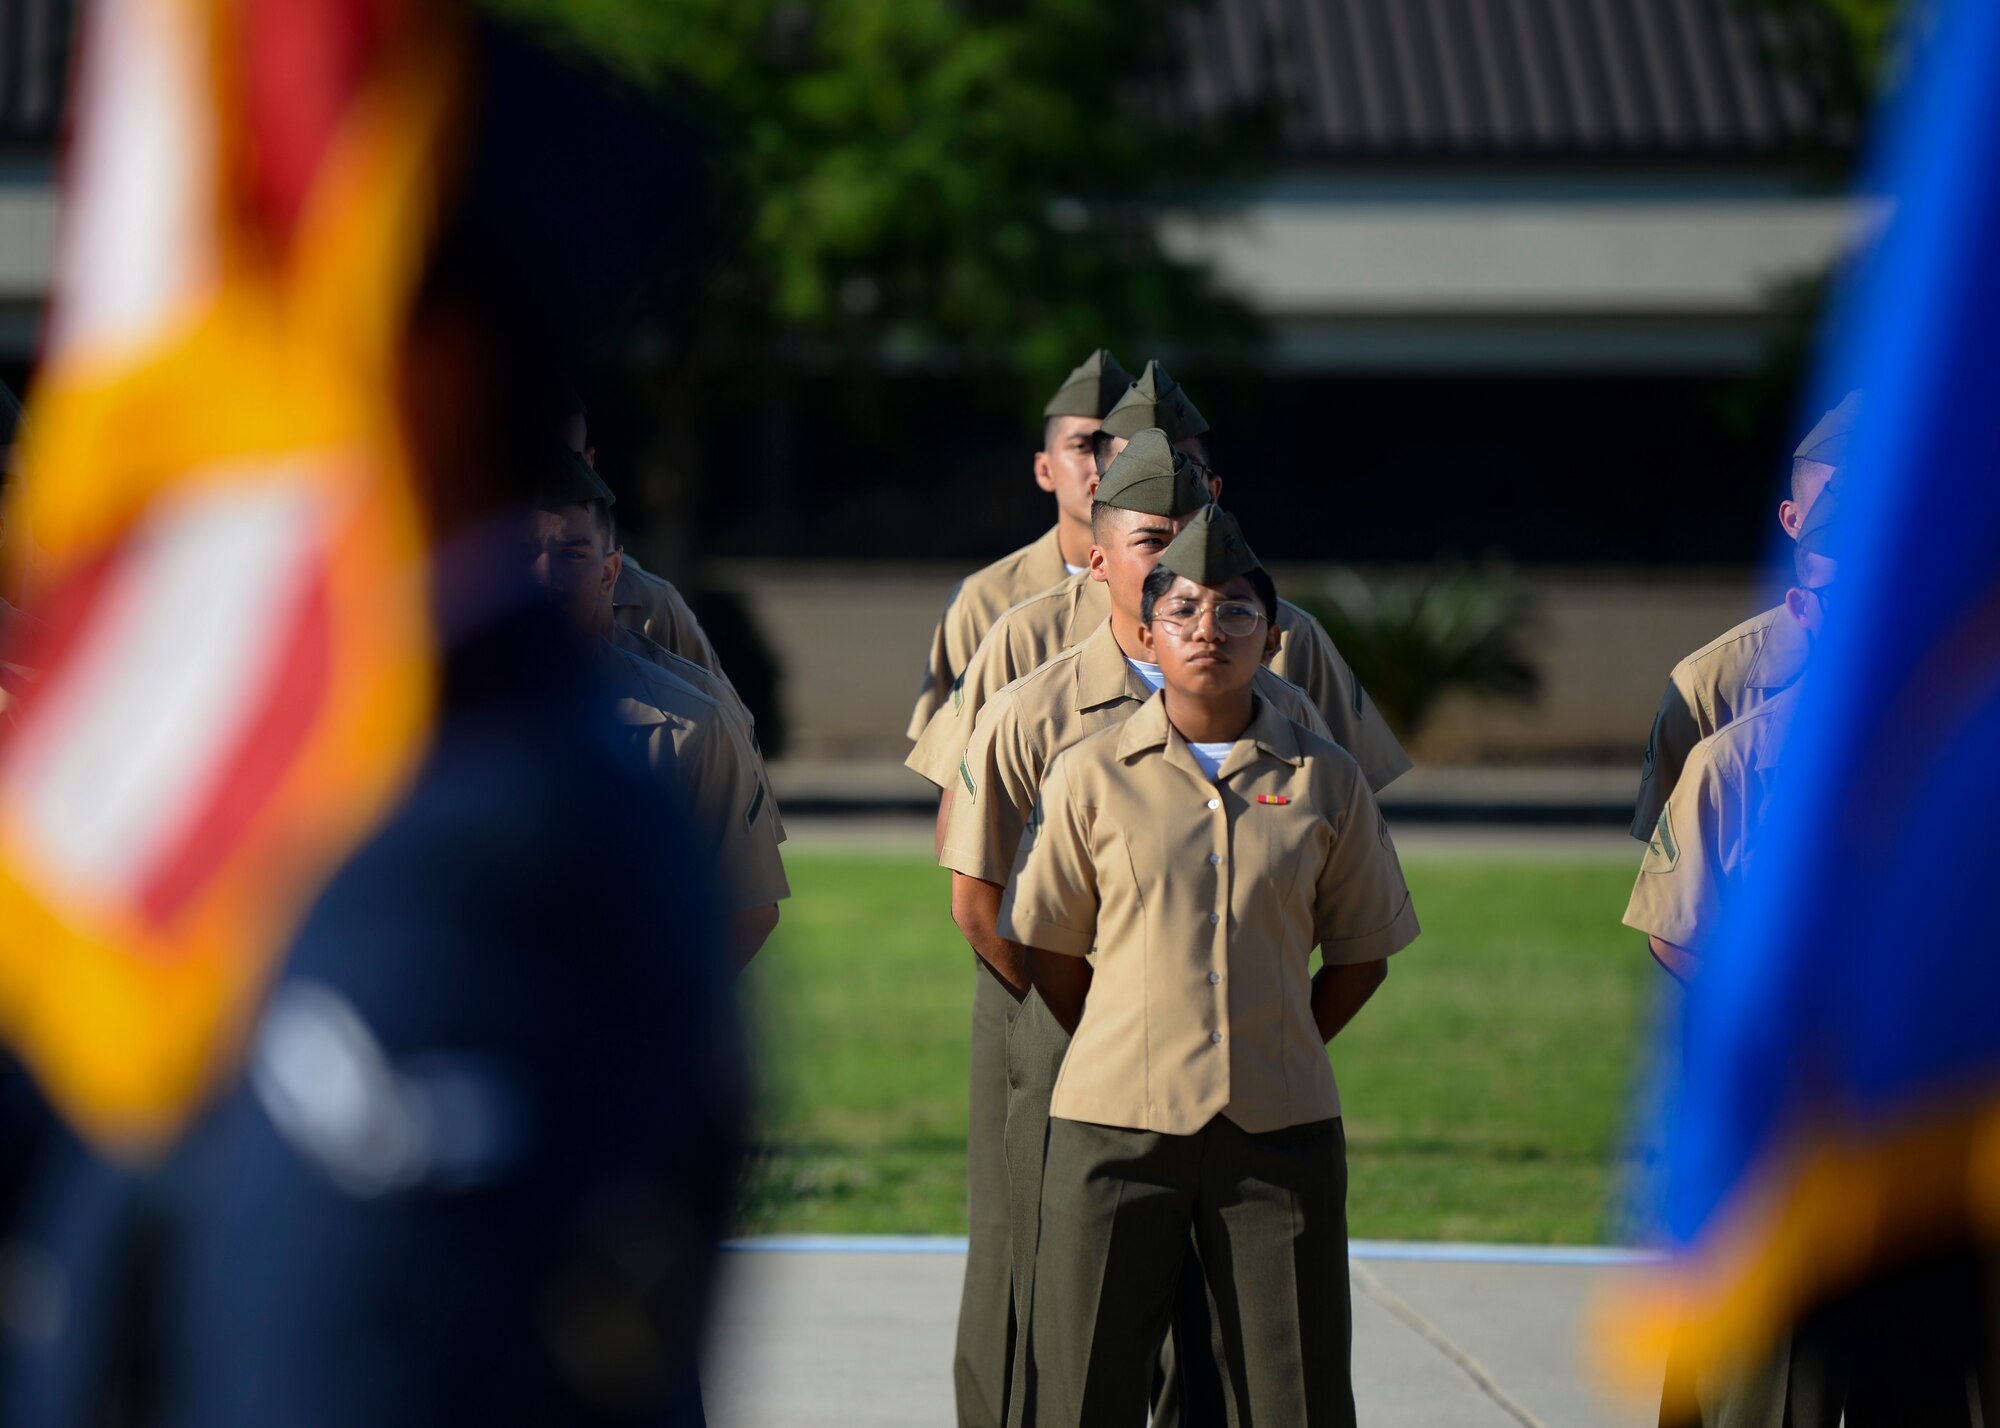 Marines from the 81st Training Group stand in formation during the 81st Training Wing change of command ceremony on the Levitow Training Support Facility drill pad at Keesler Air Force Base, Mississippi, June 17, 2021. The ceremony is a symbol of command being exchanged from one commander to the next by the handing-off of a ceremonial guidon. U.S. Air Force Col. Heather Blackwell relinquished command of the 81st TRW to Col. William Hunter. (U.S. Air Force photo by Senior Airman Spencer Tobler)